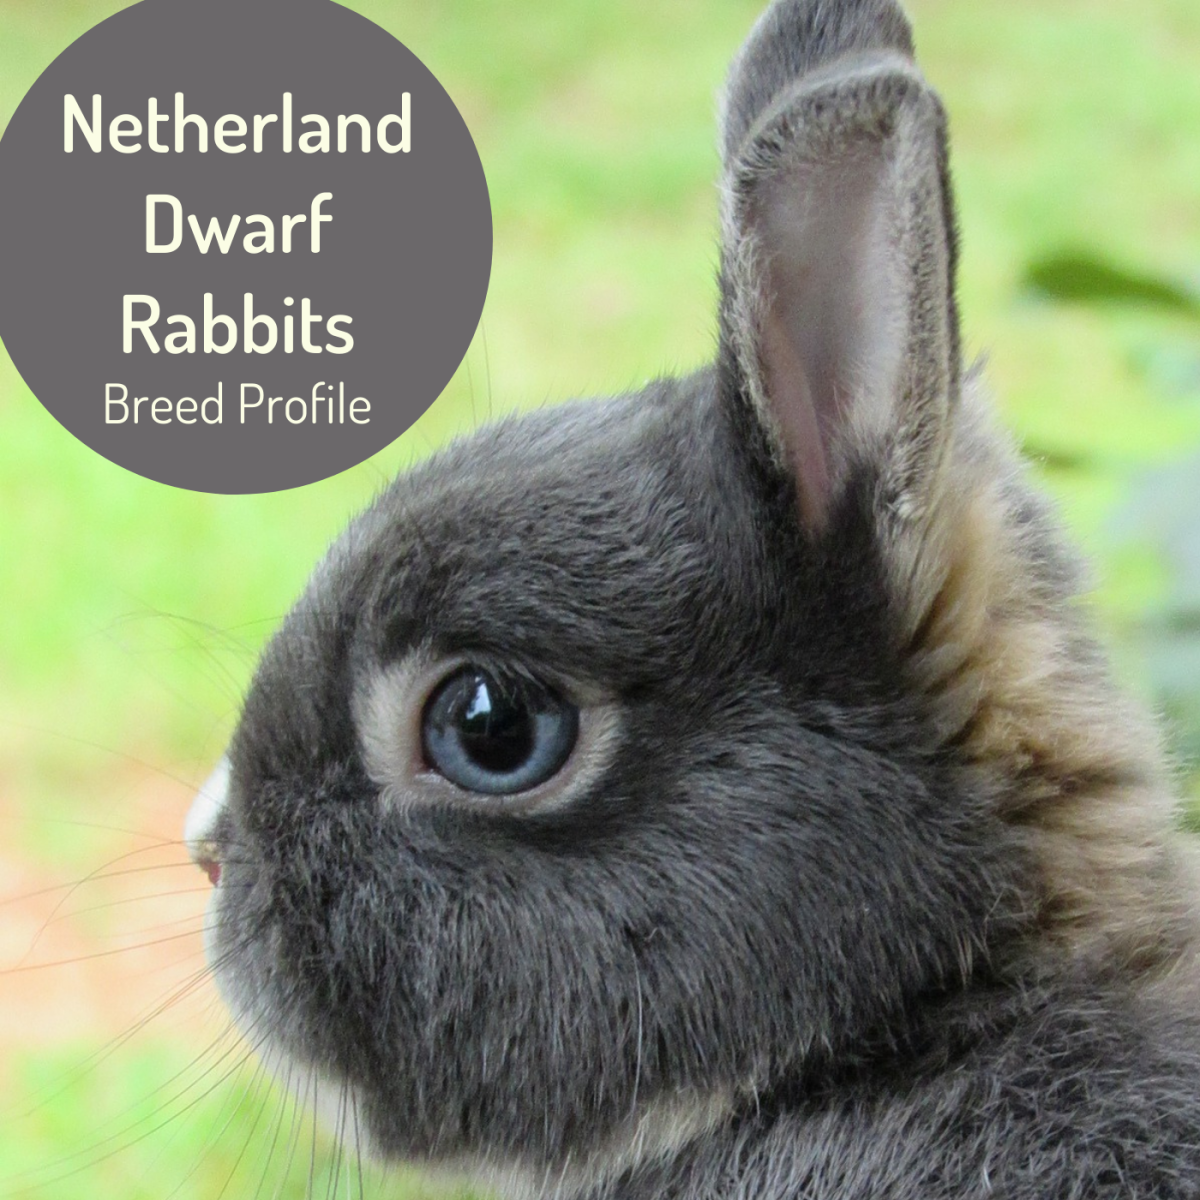 Learn more about the adorable and personable Netherland Dwarf rabbit.